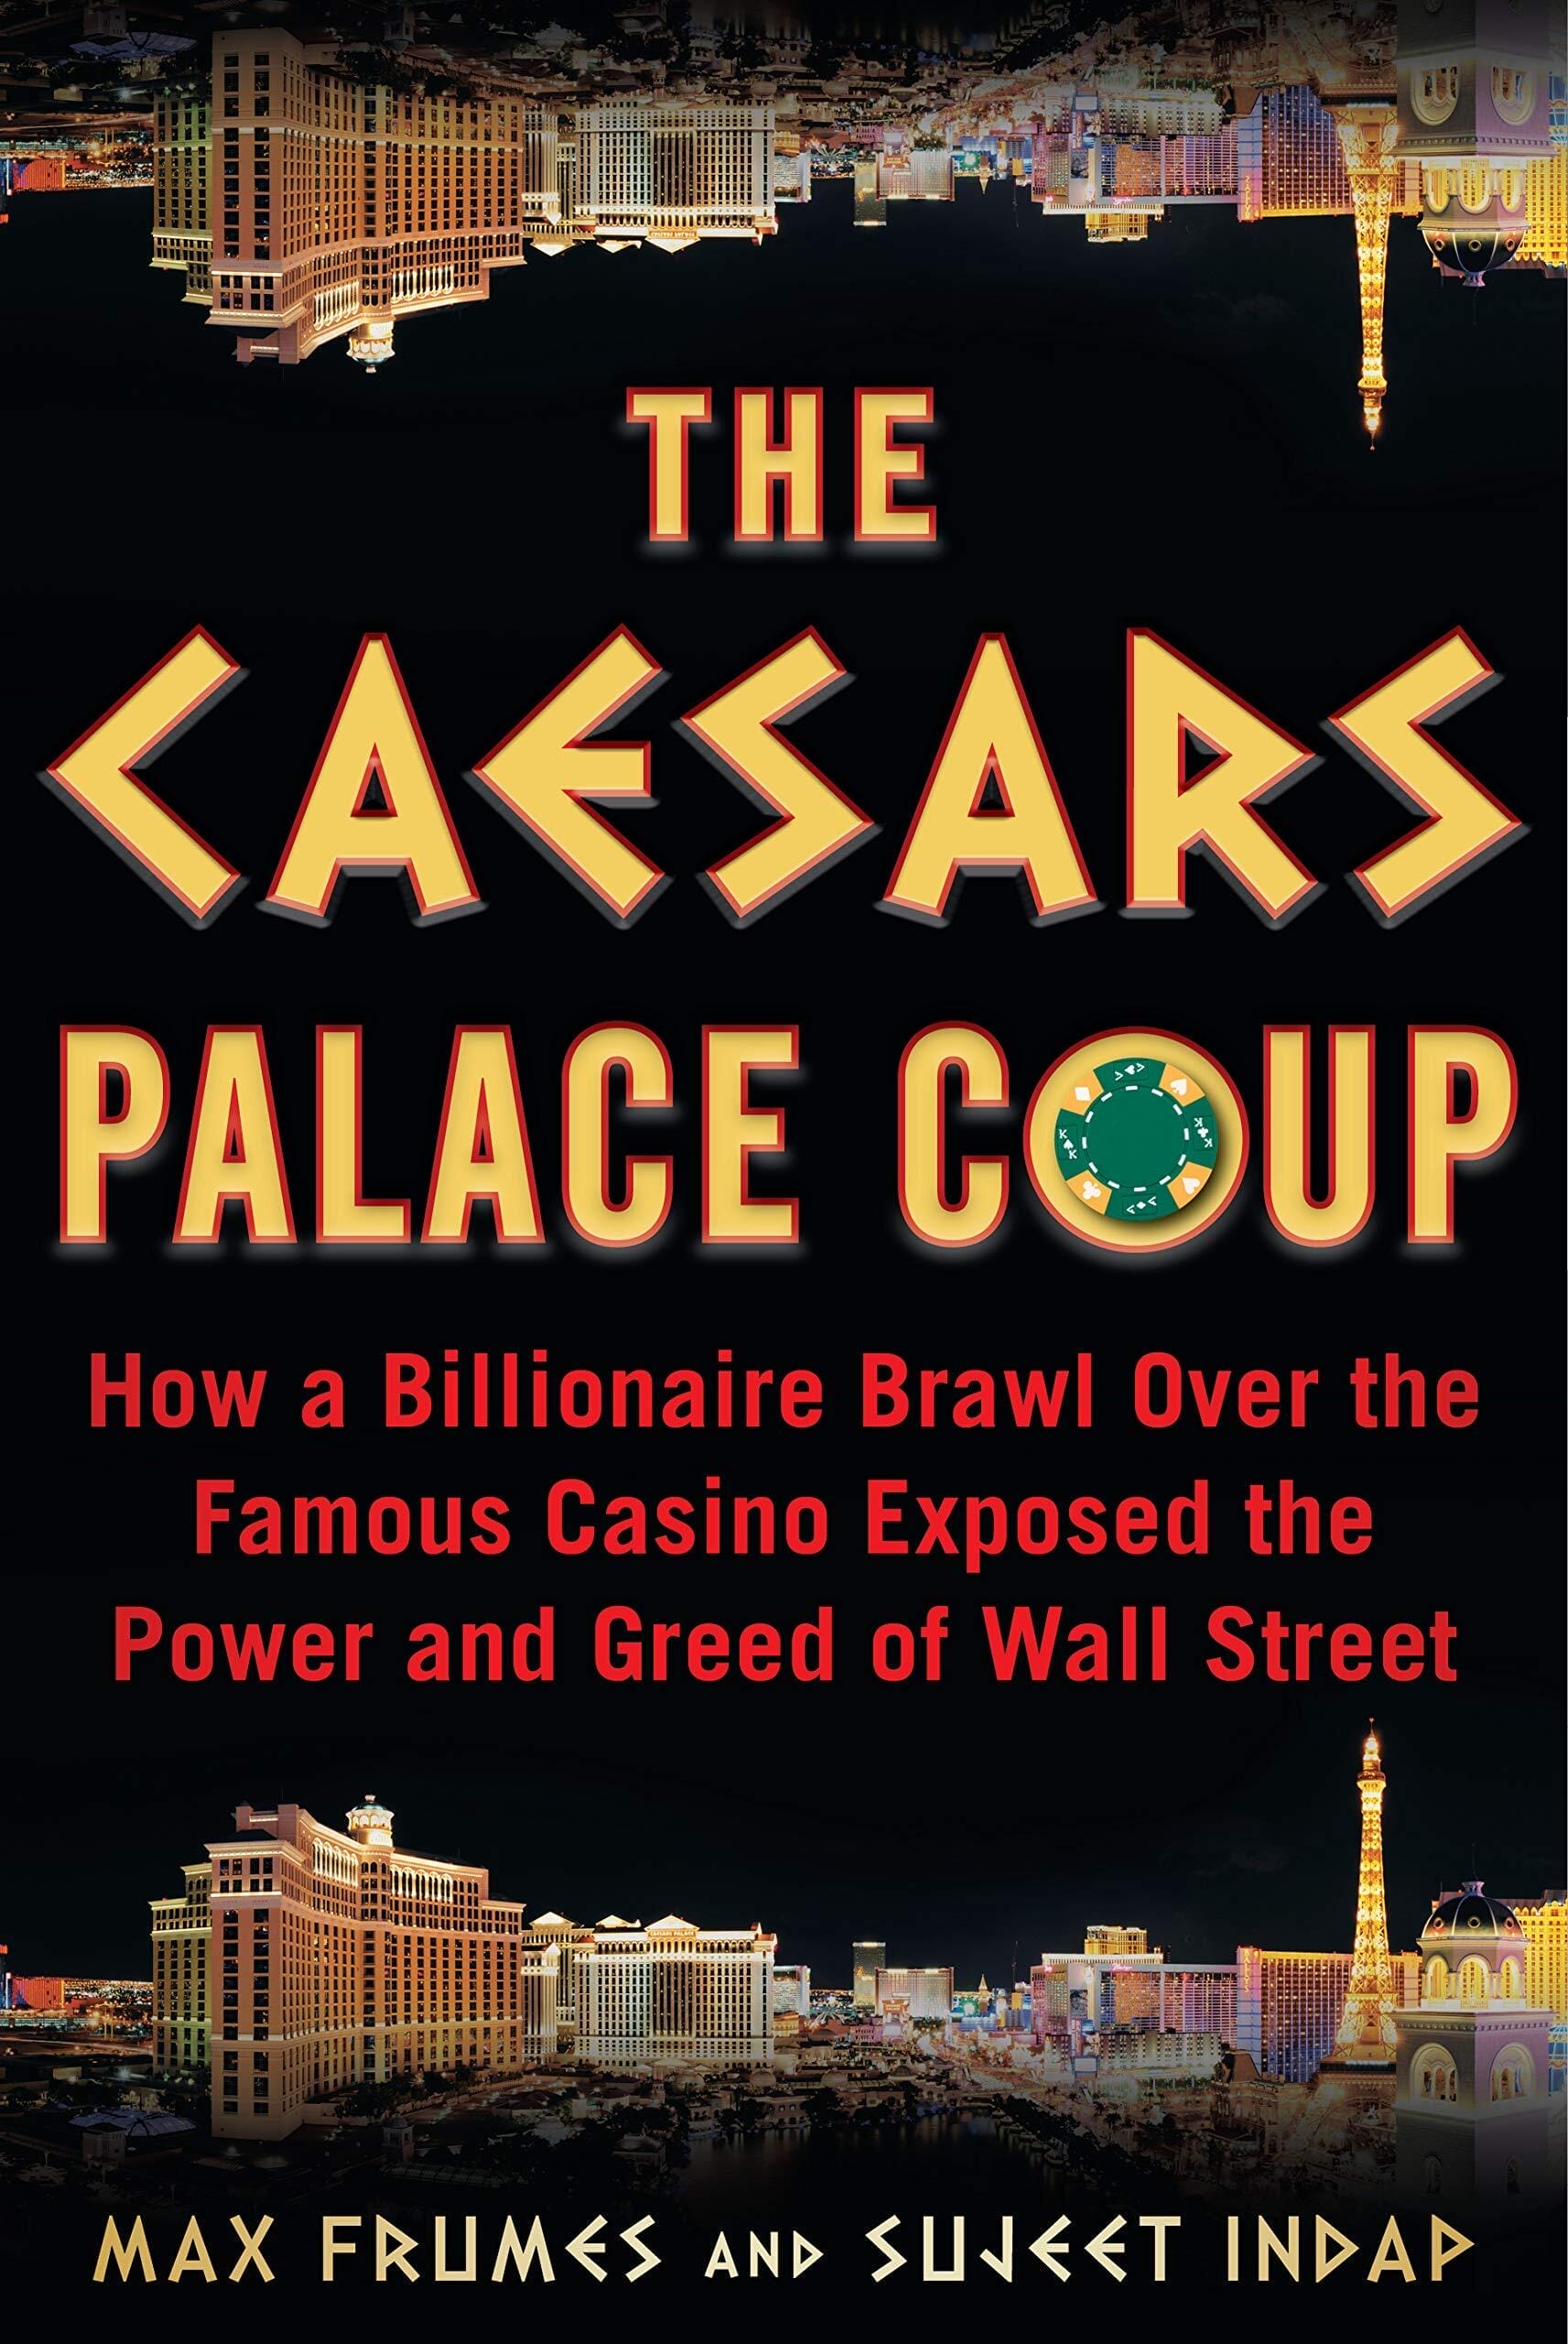 Book cover for "The Caesars Palace Coup"